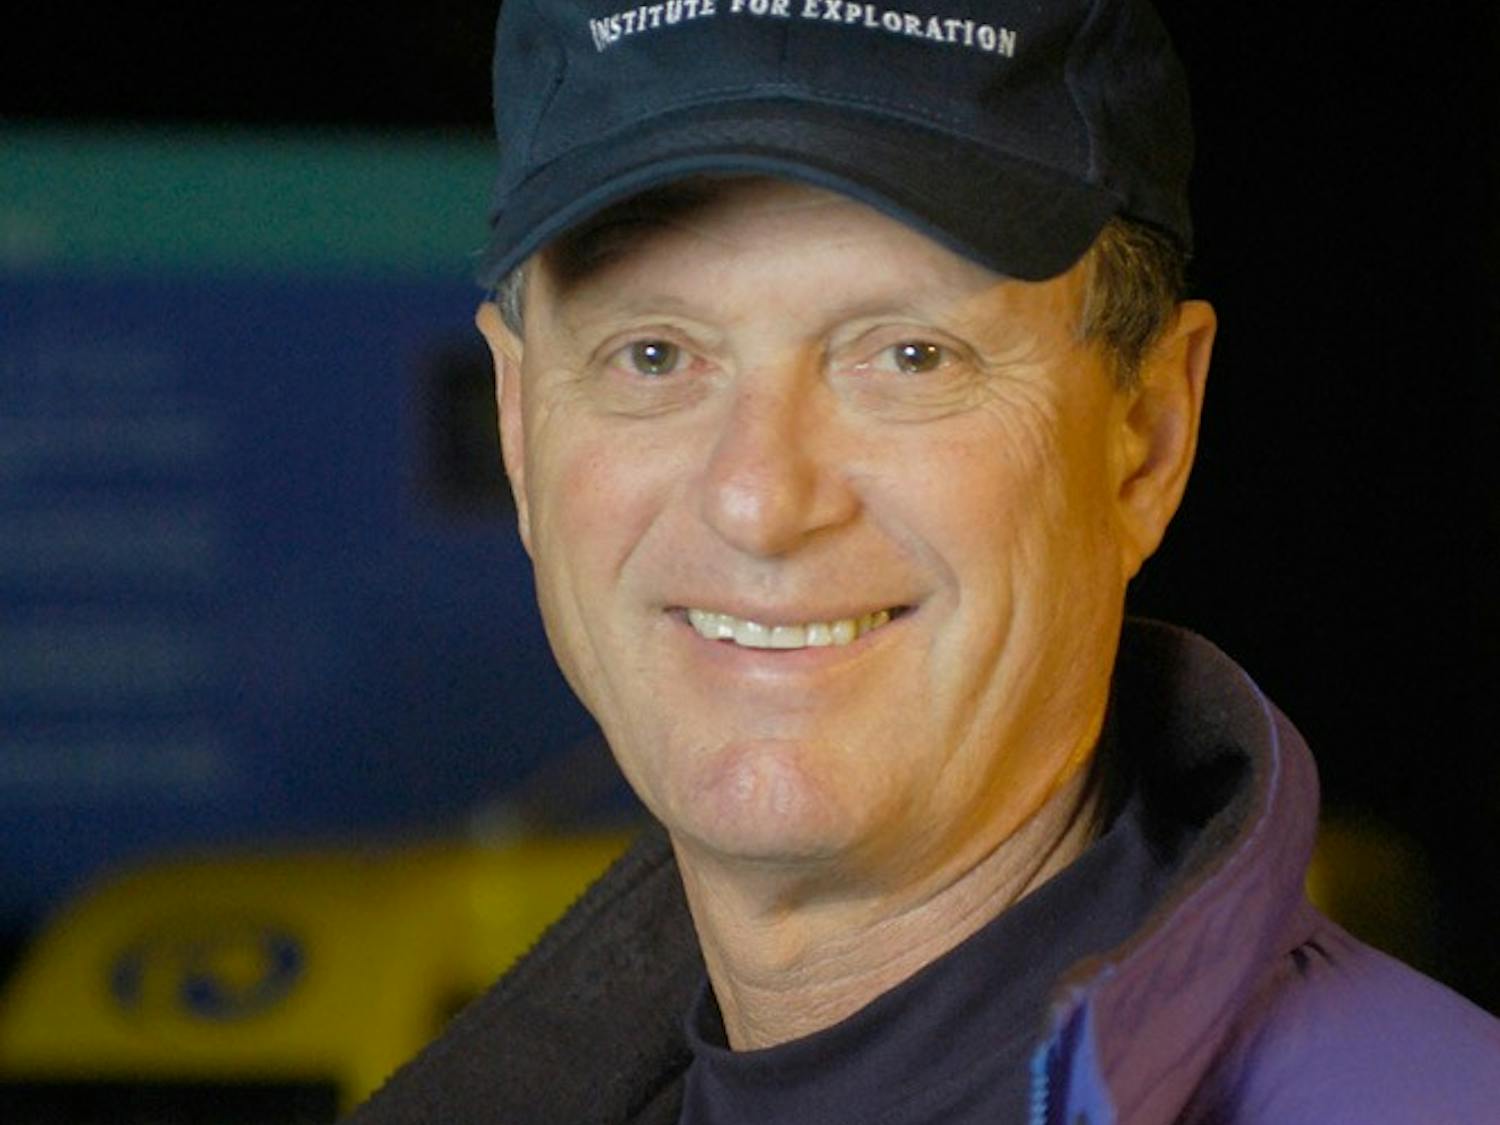 Robert Ballard will be discussing deep-sea exploration at Alumni Arena on April 1. Ballard is a professor of oceanography at the University of Rhode Island and helped discover the RMS Titanic in 1985.